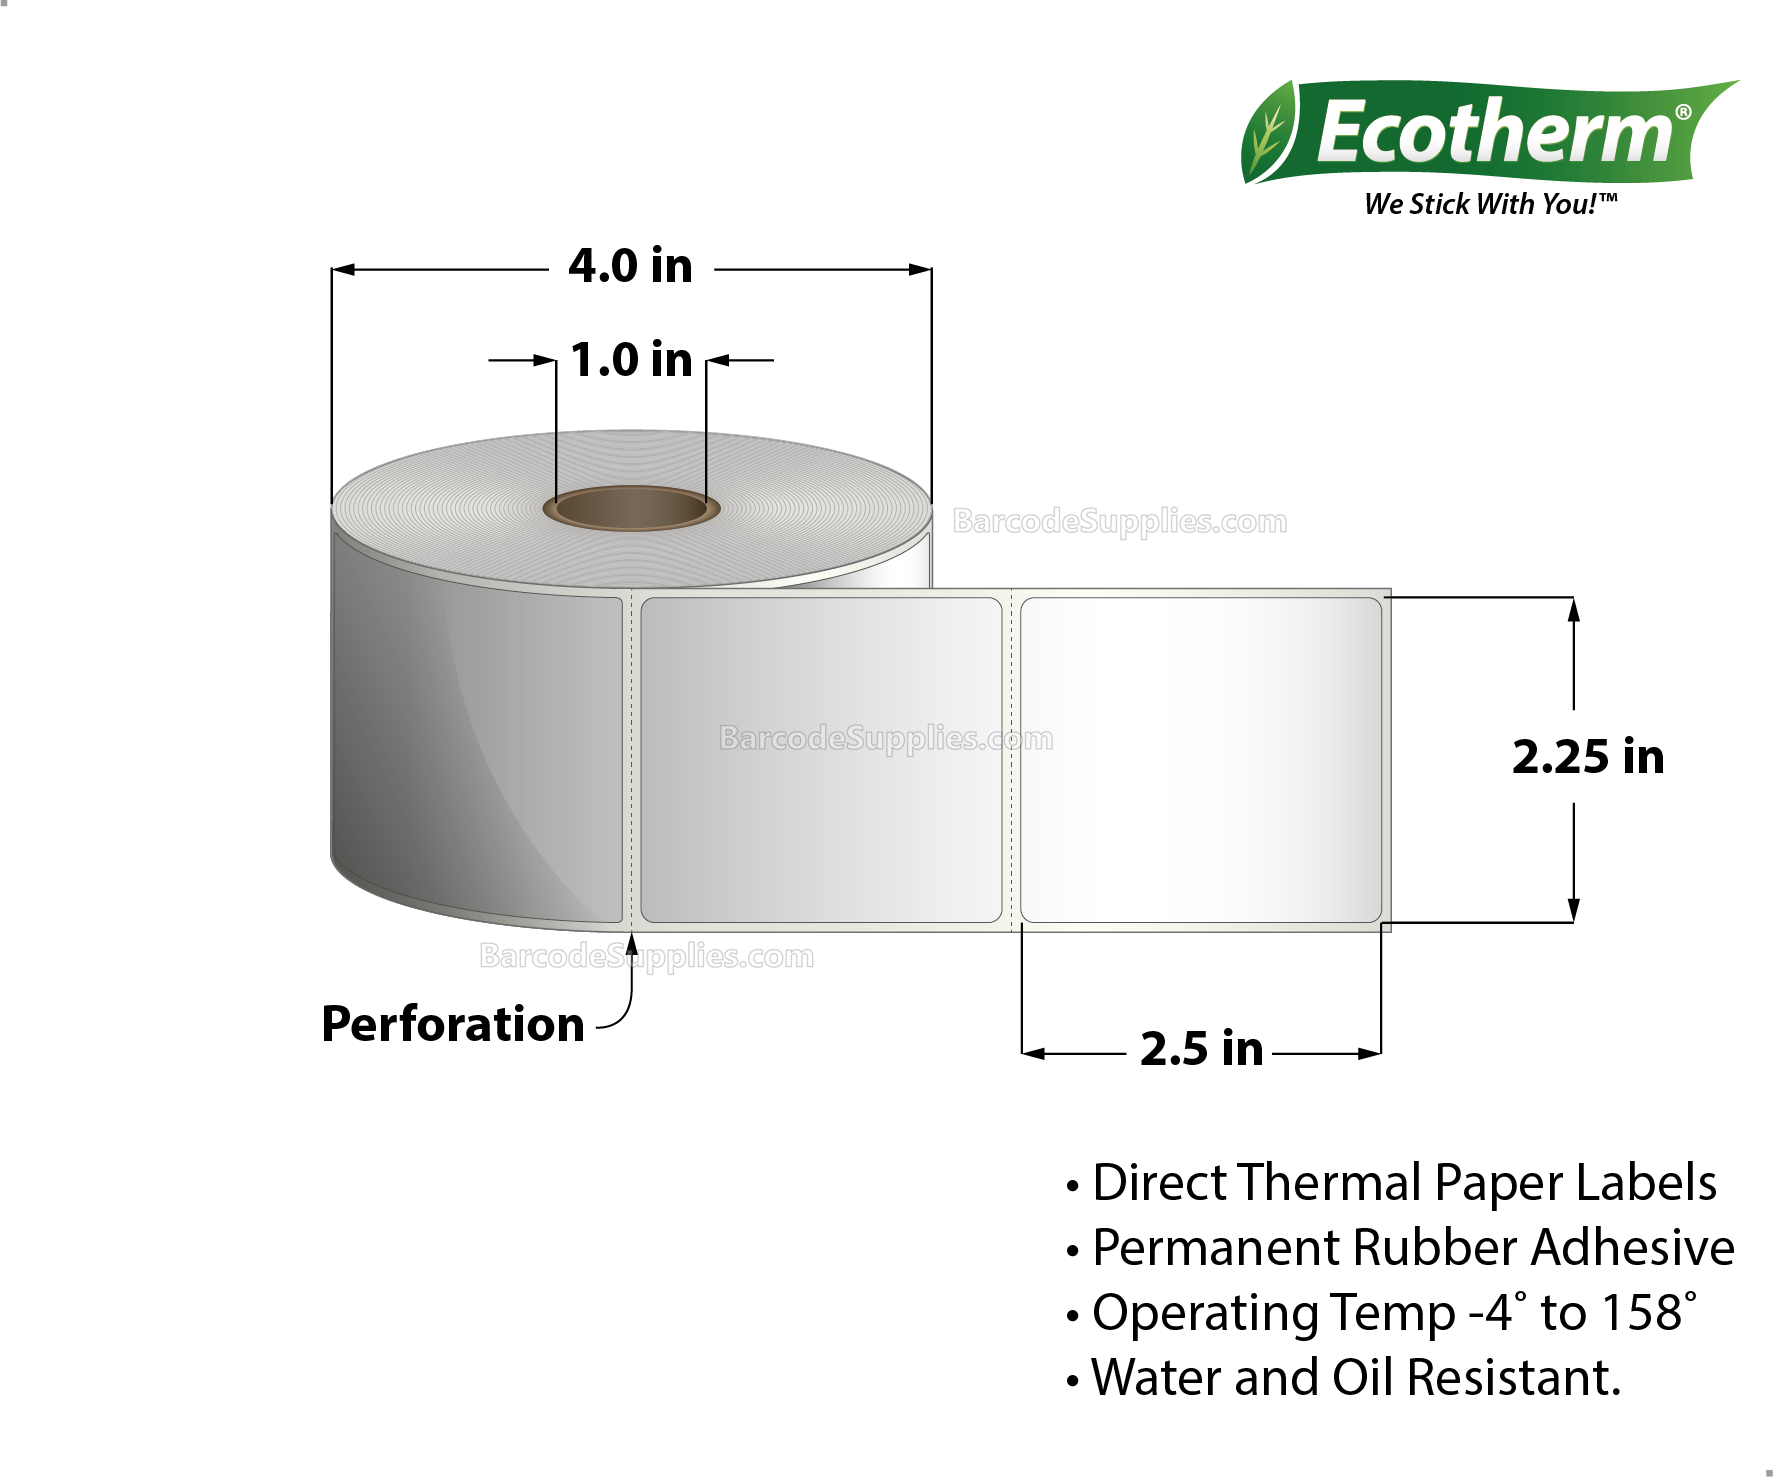 Products 2.25 x 2.5 Direct Thermal White Labels With Rubber Adhesive - Perforated - 600 Labels Per Roll - Carton Of 4 Rolls - 2400 Labels Total - MPN: ECOTHERM14135-4